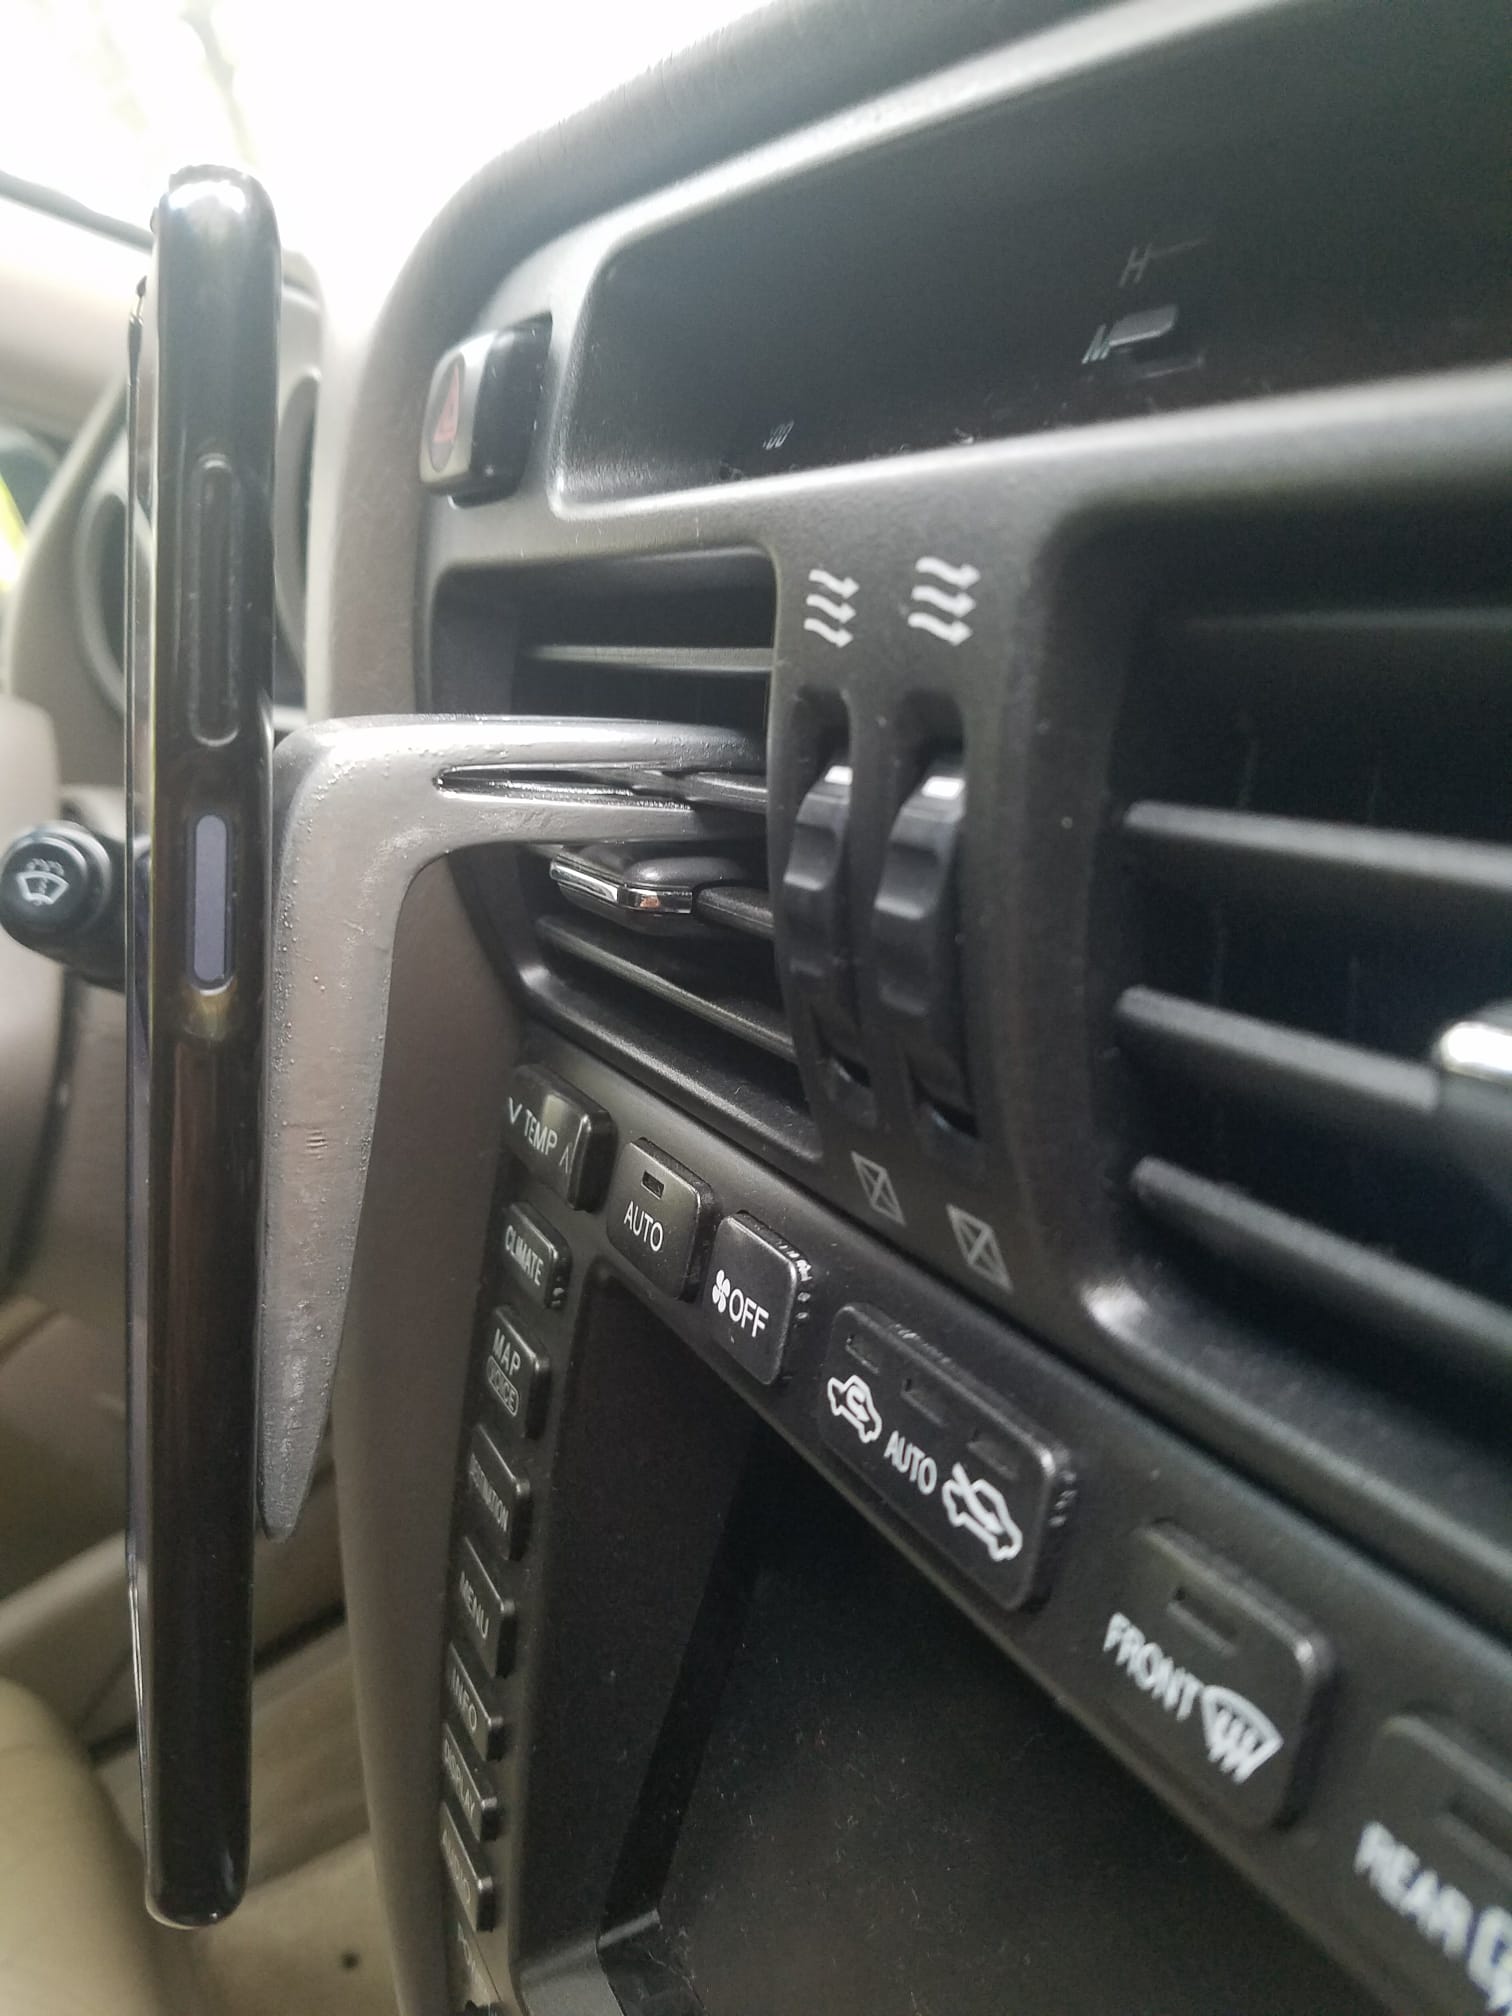 A DIY plywood smartphone holder for your car